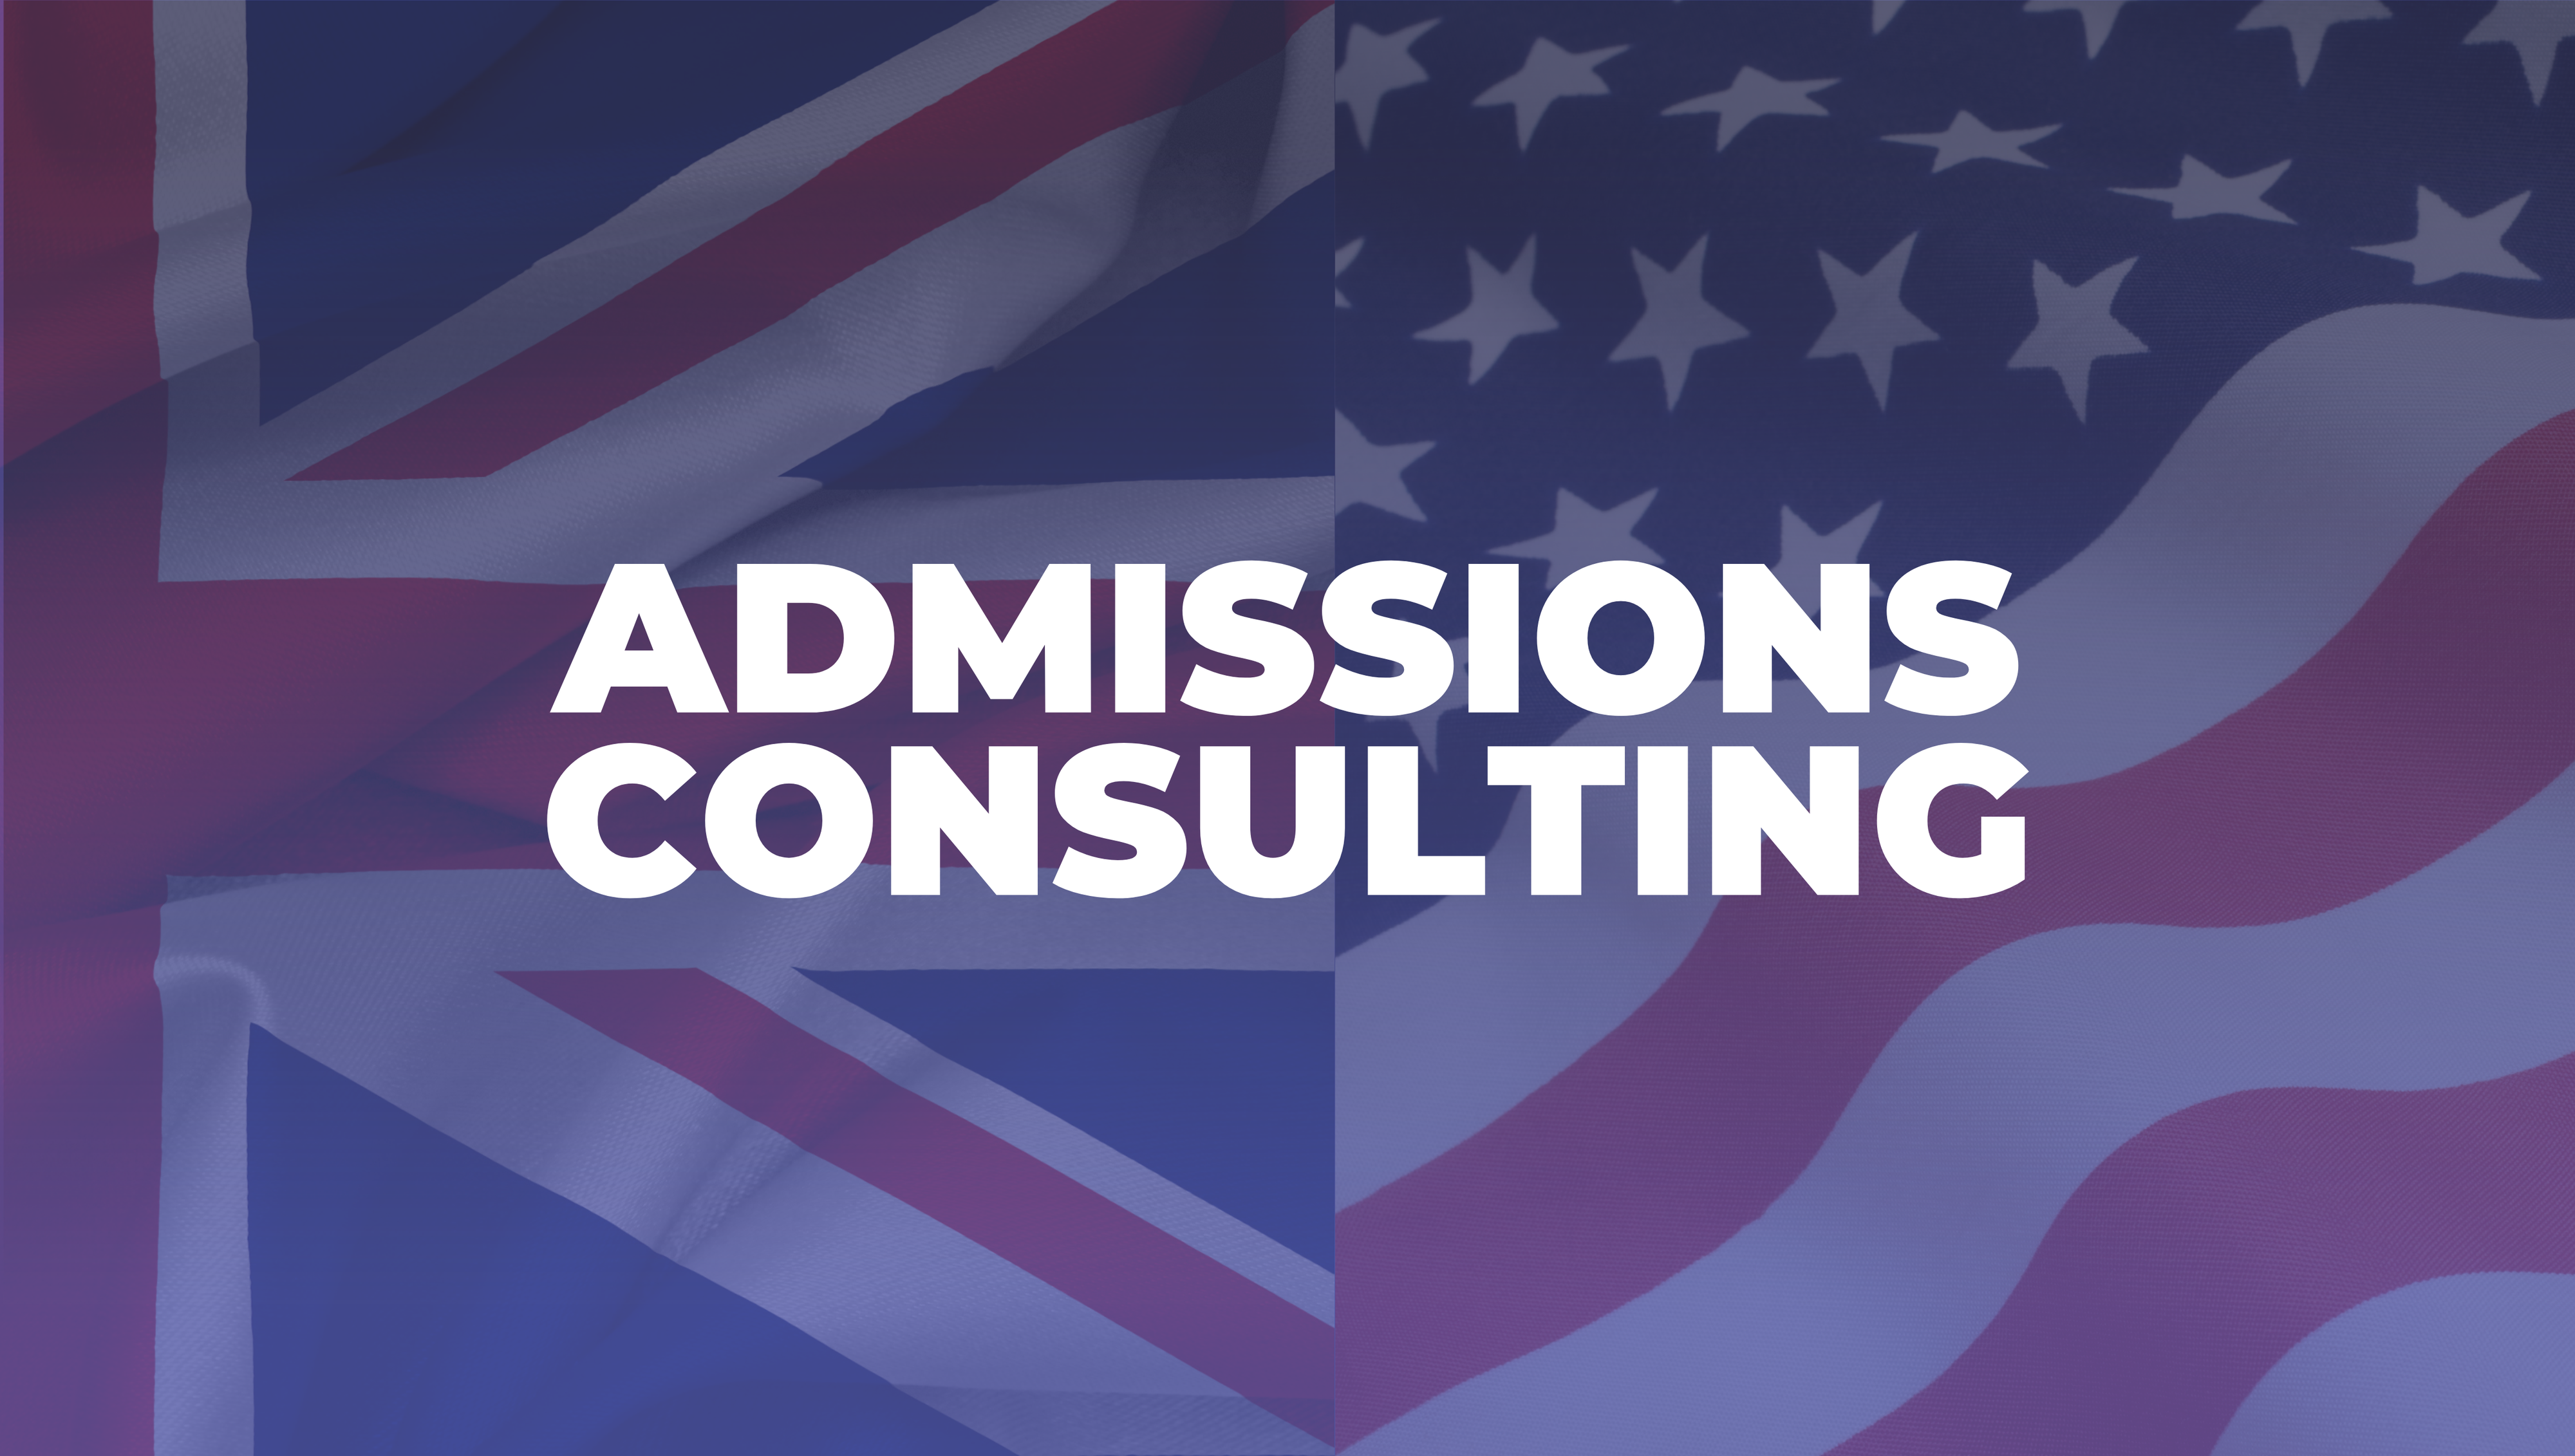 University Admissions Consulting